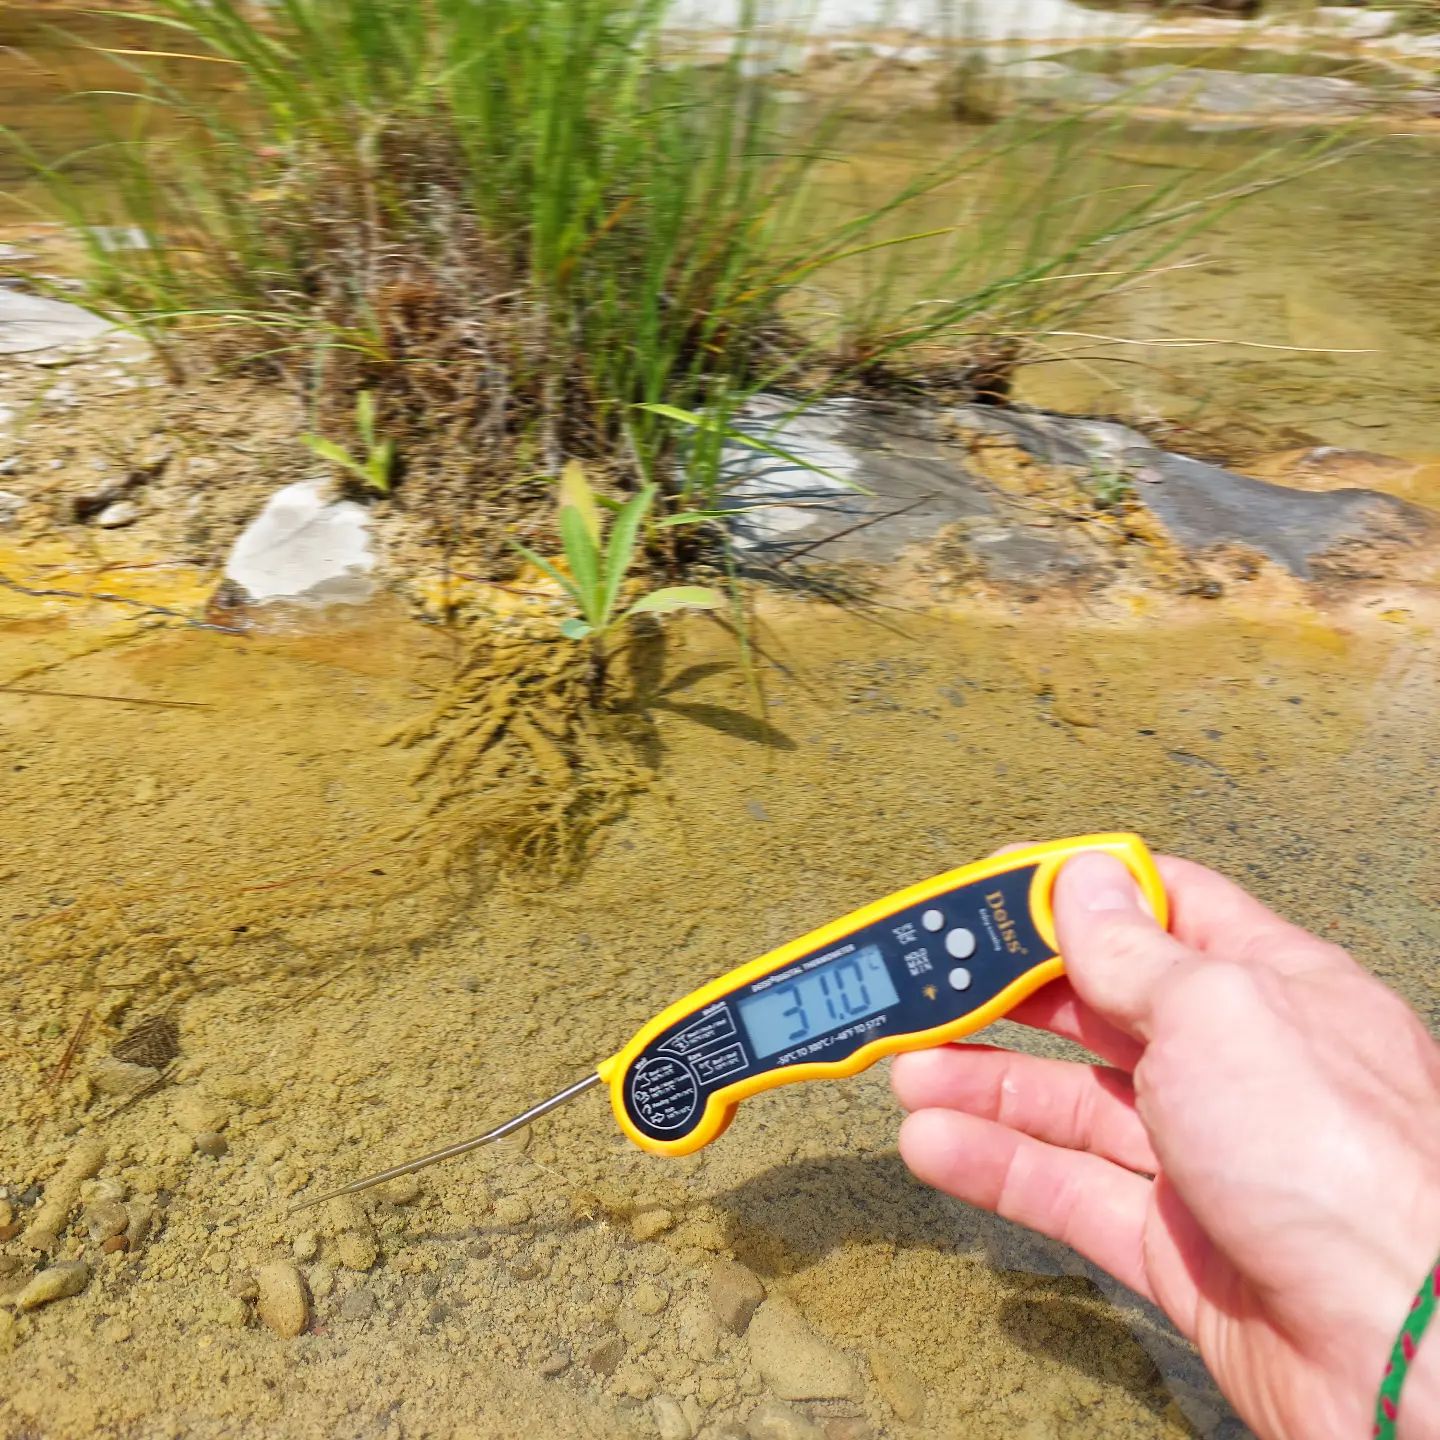 There is large temperature variation in the refuge pools we are sampling, with many actually keeping a moderate temperature due to sufficient cover, but others heating up to well over 30C. This large pool ranged between 29C and 33C, which, so far, the Mediterranean barbel still seem to be able to withstand

#freshwaterecology #freshwaterstream #environmentalchange #fieldbiology #fieldresearch #riversampling #lagarrotxa #riuscatalans